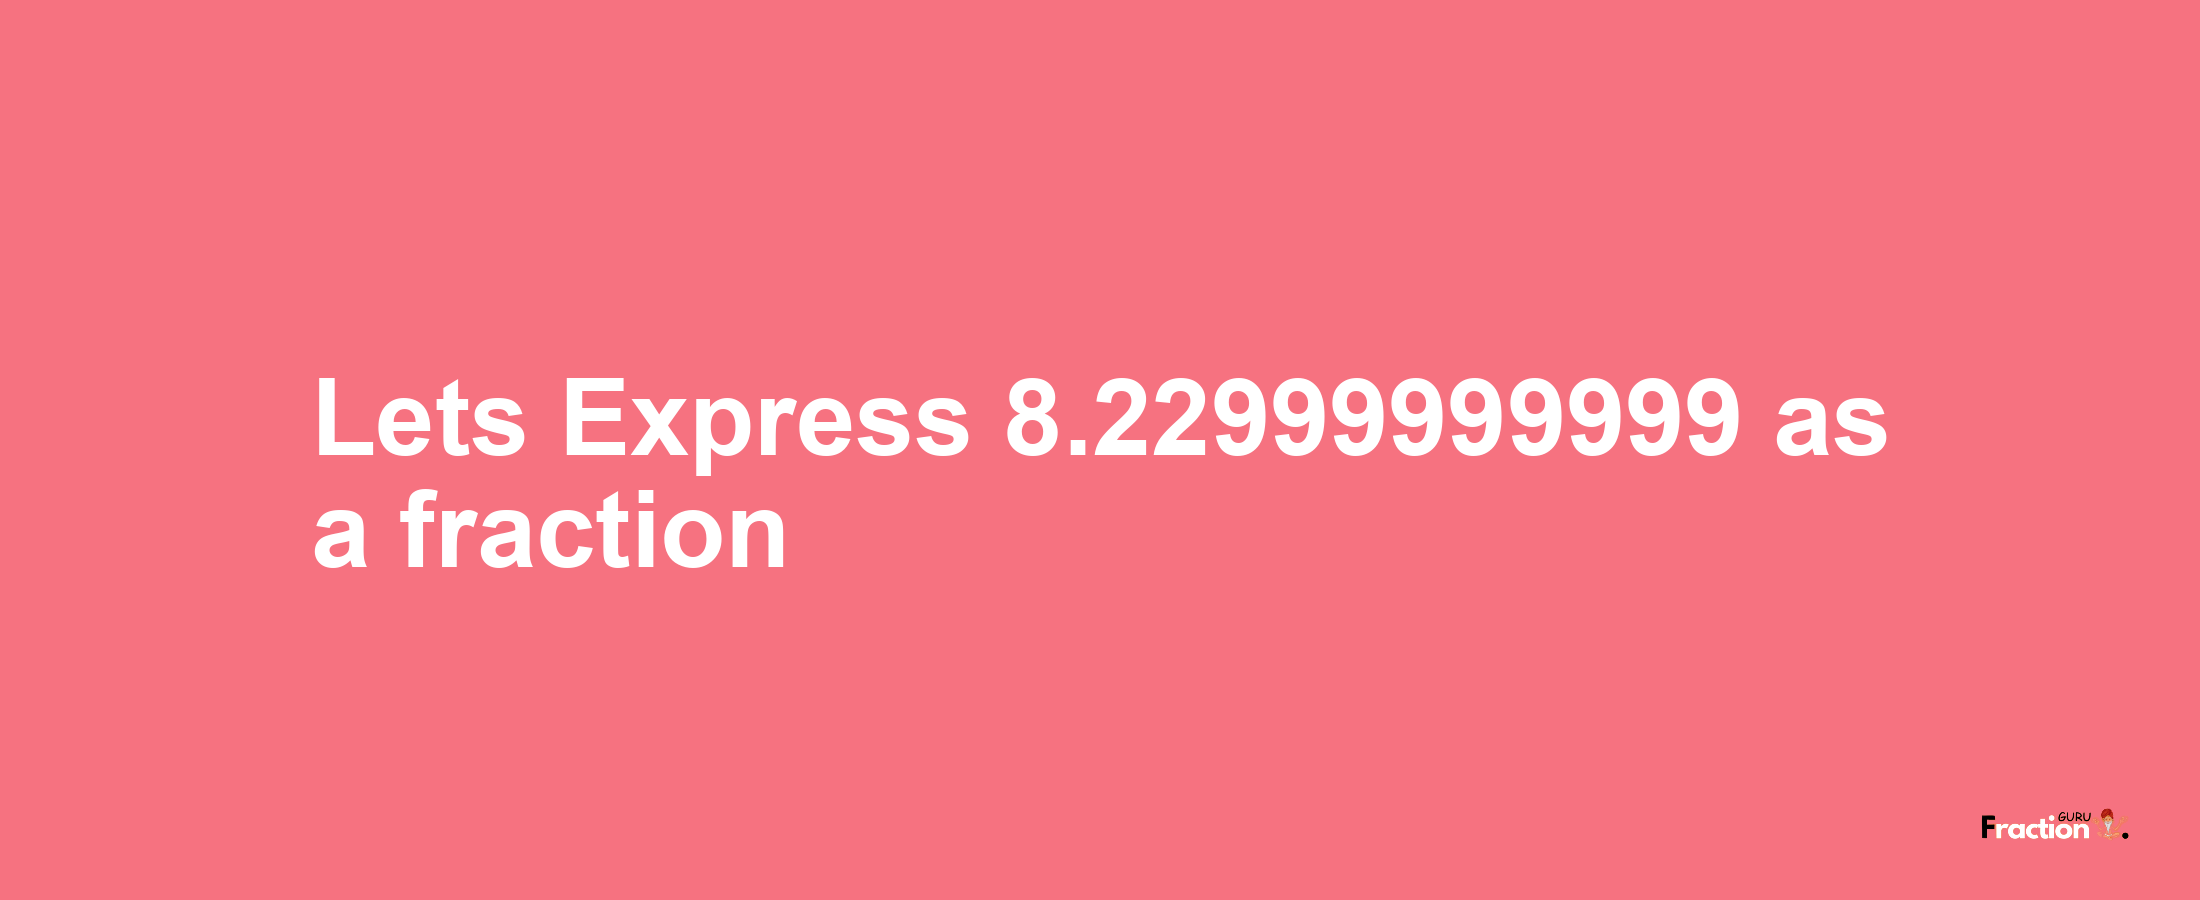 Lets Express 8.22999999999 as afraction